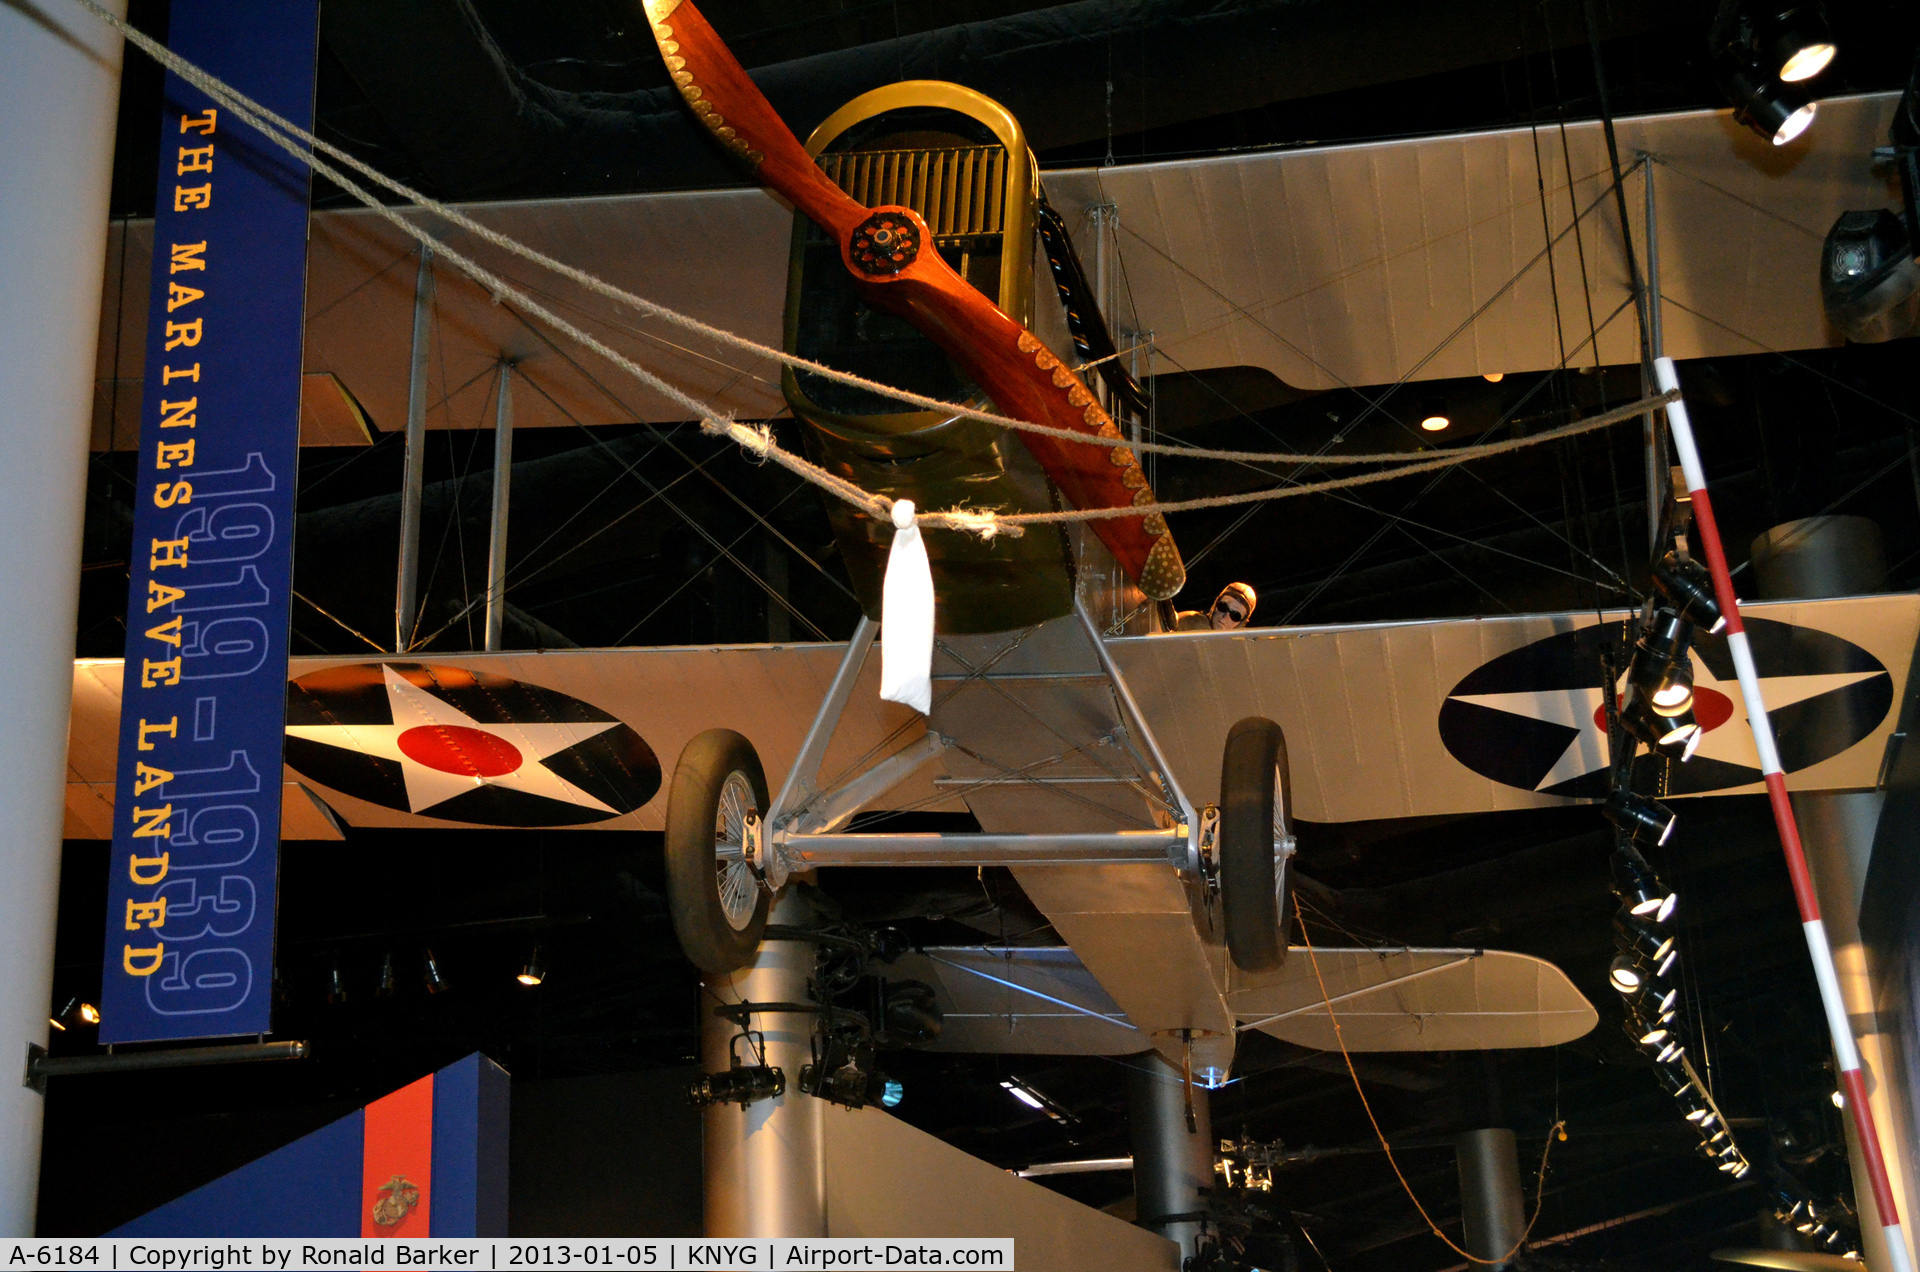 A-6184, Dayton-Wright DH-4 (replica) C/N Not found A-6184, DH-48 A6184  USMC Museum